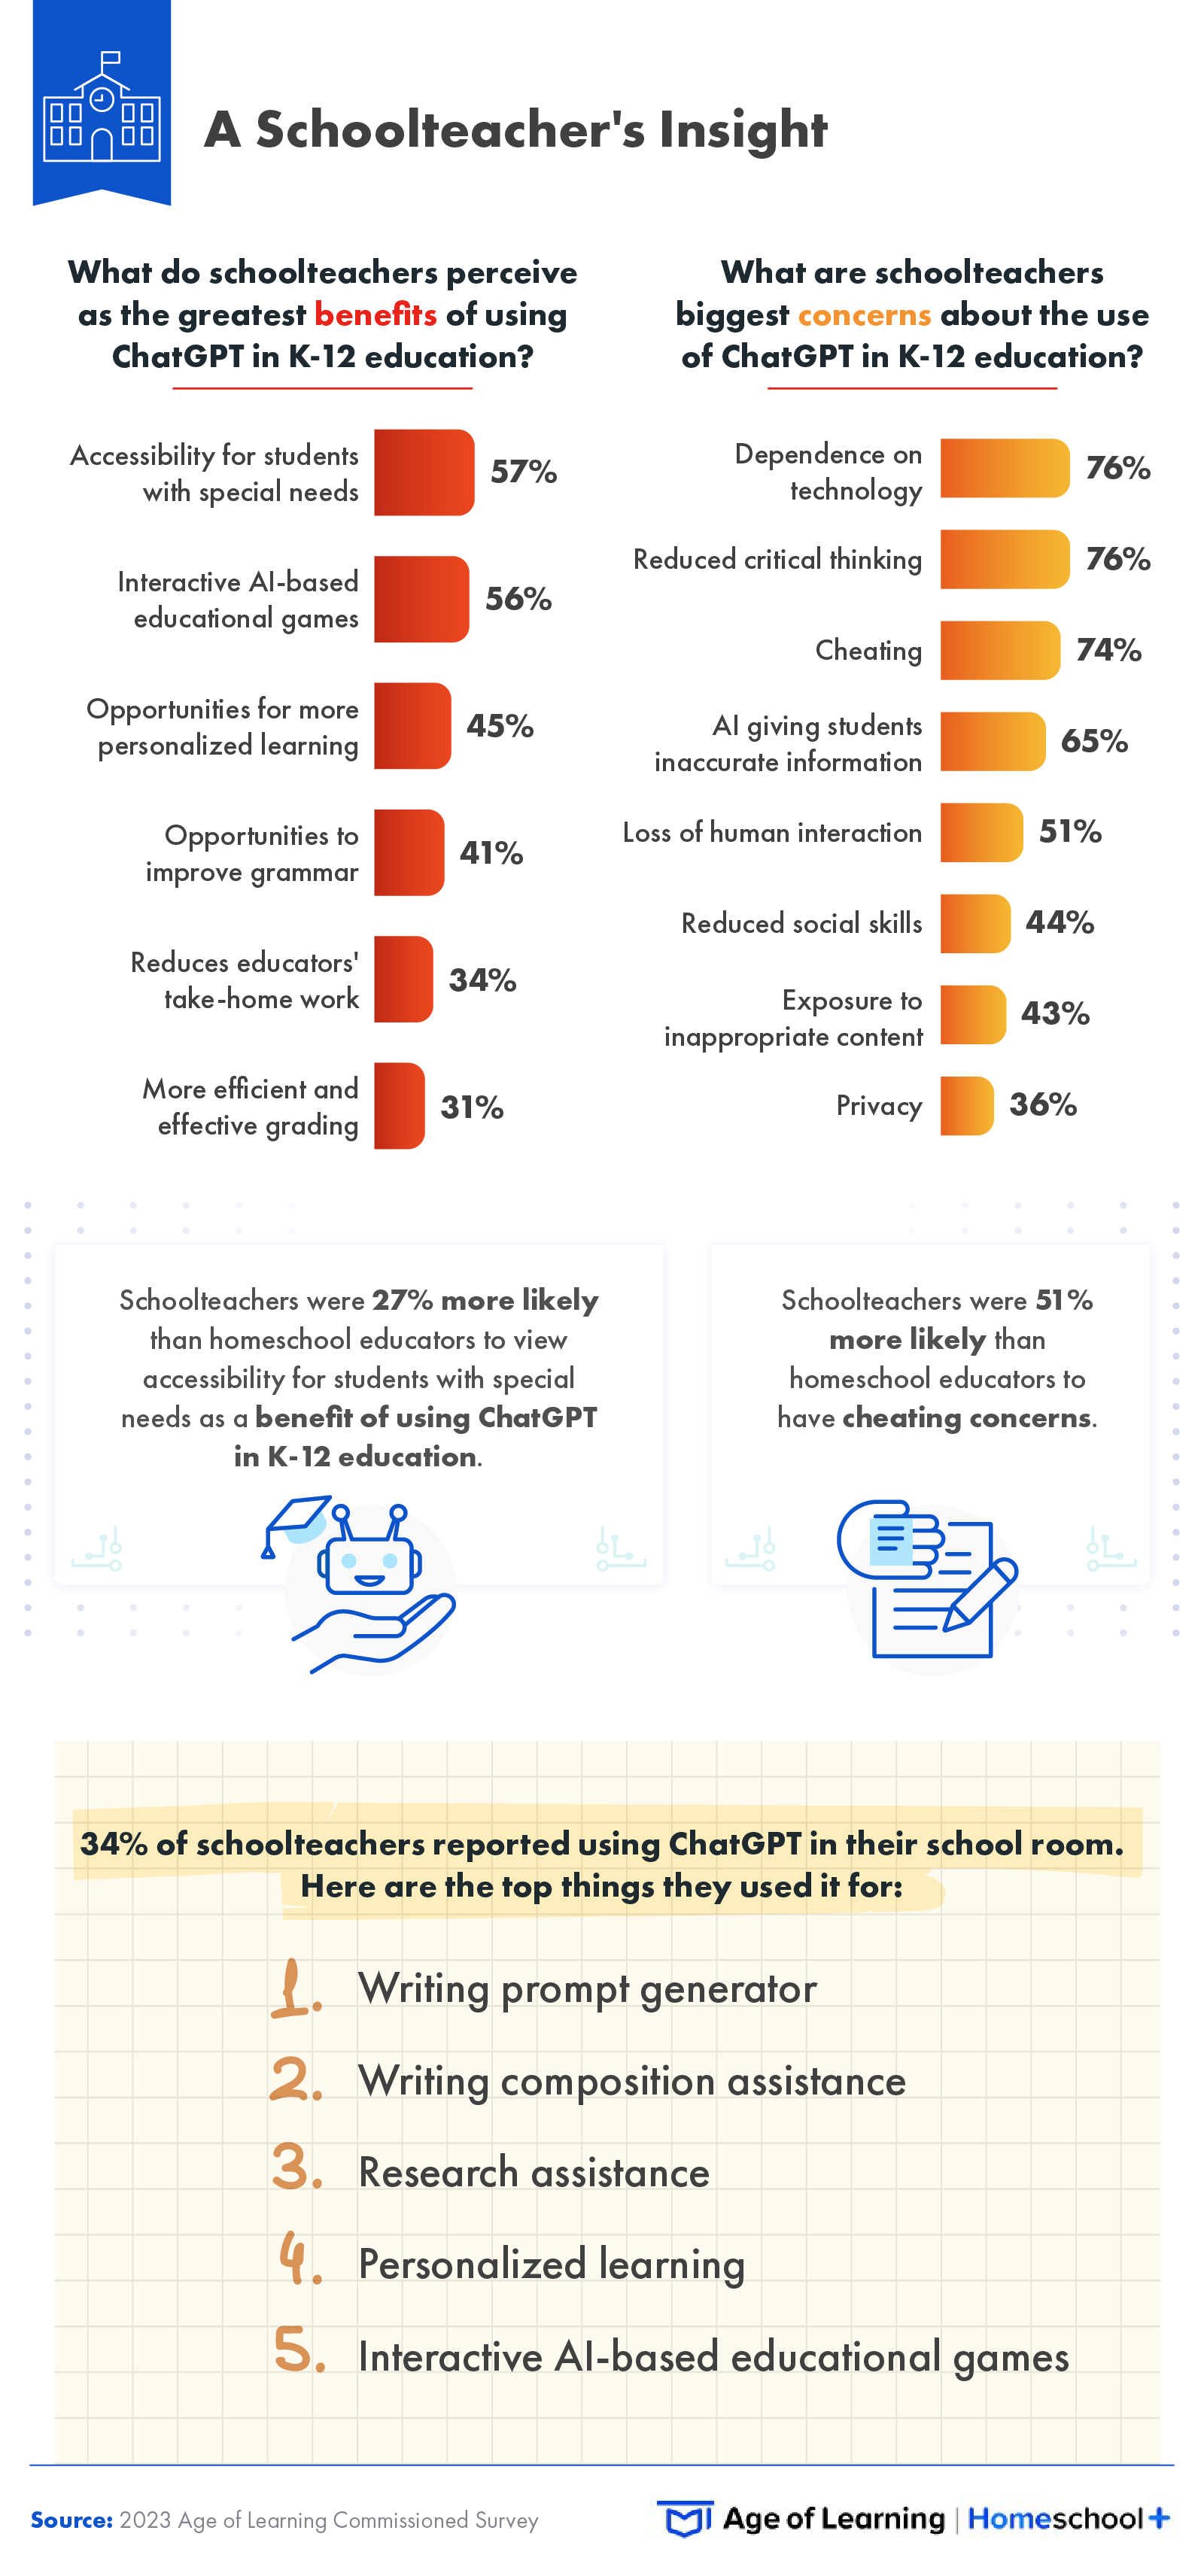 This infographic explores schoolteachers perceived benefits and concerns of using ChatGPT in K-12 education. 